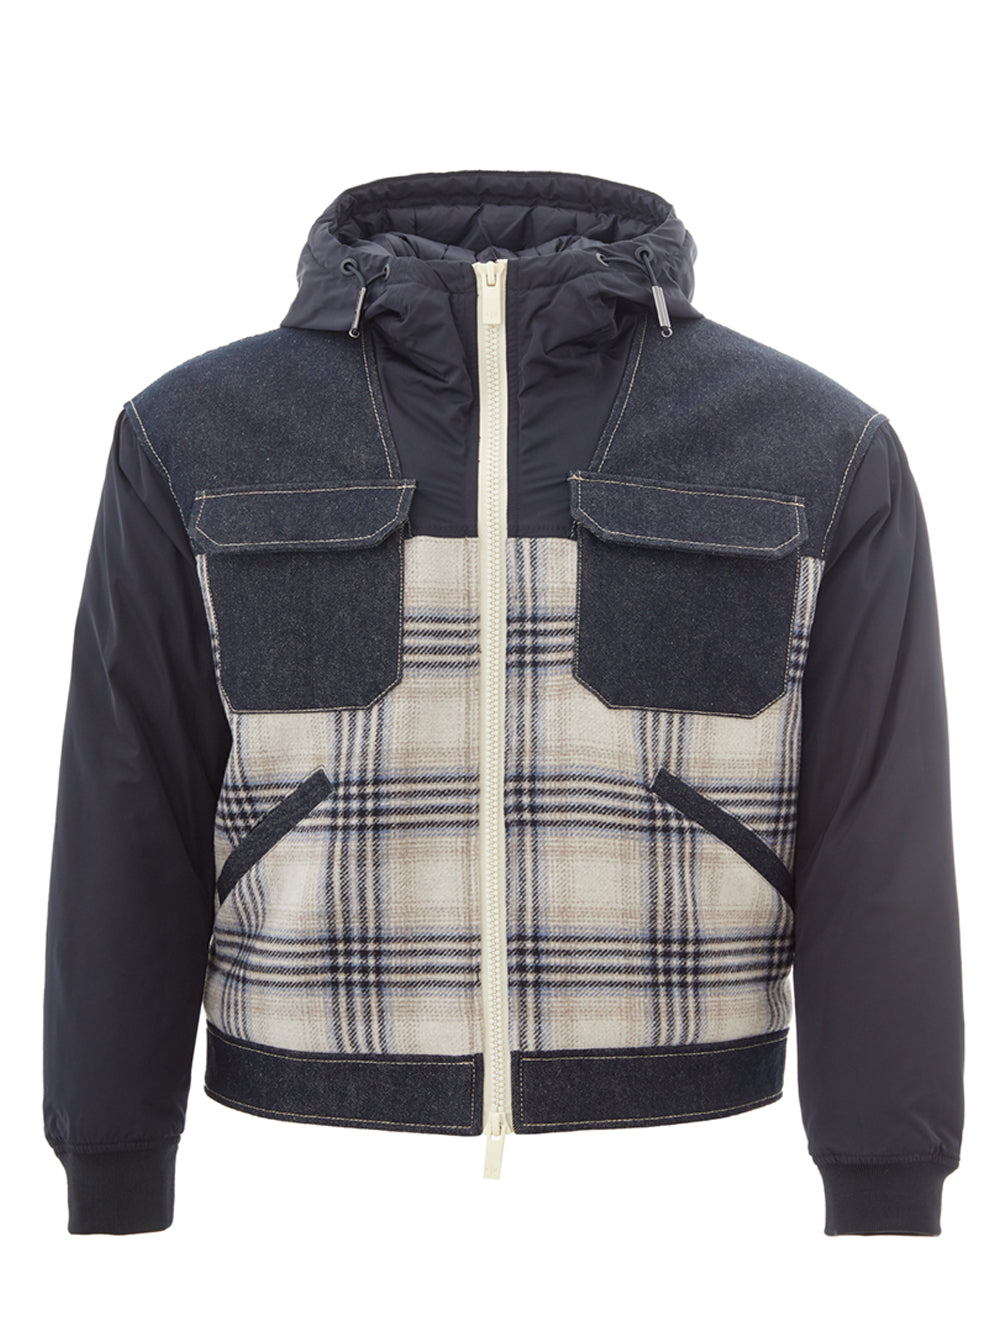 Armani Exchange Denim Quilted Jacket with Check Details